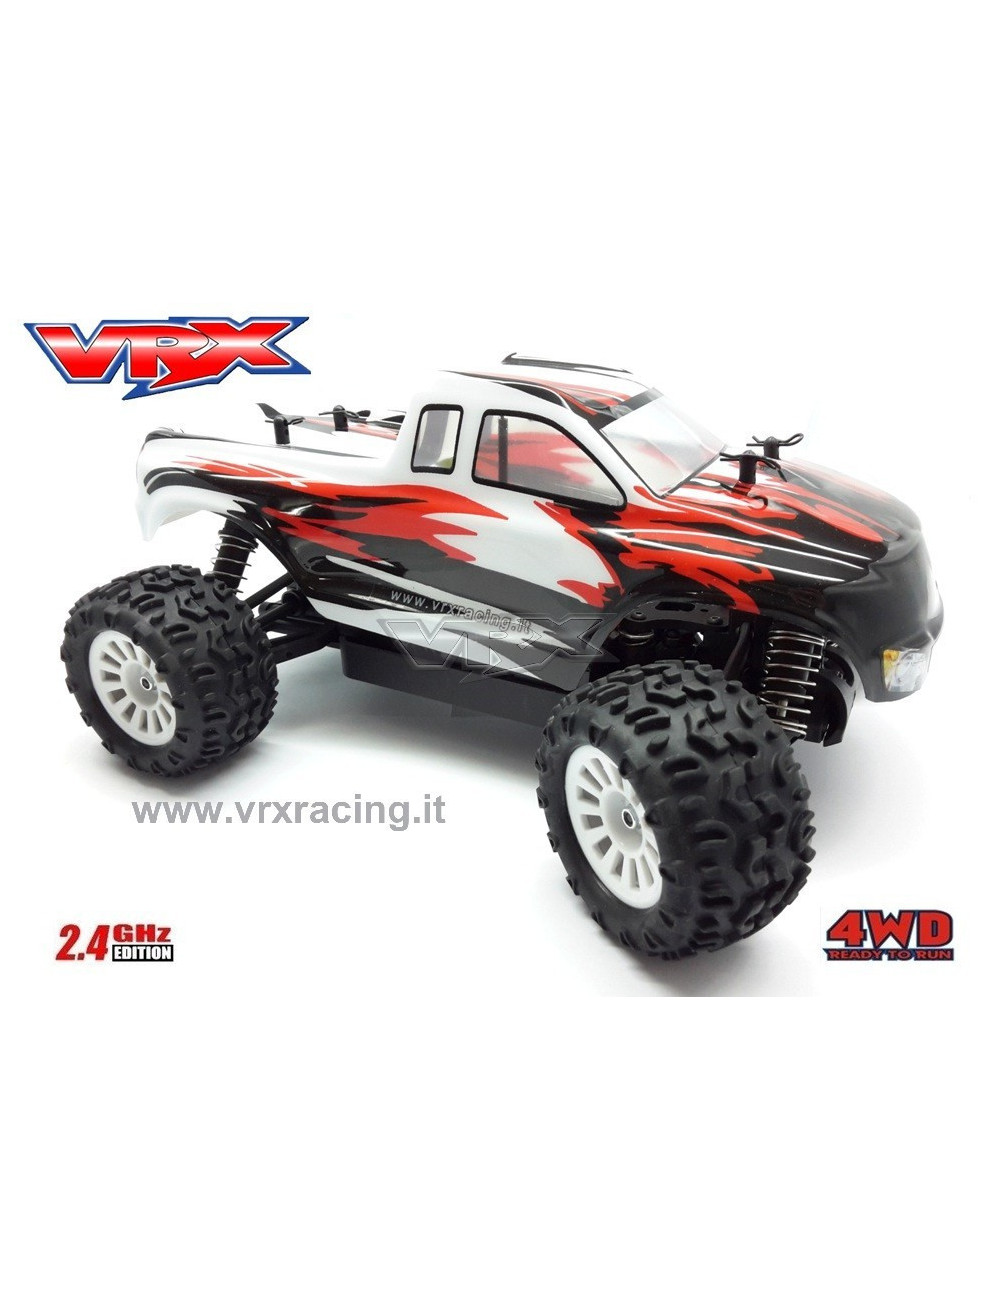 Monster truck MT-BD scala 1/18 motore elettrico a spazzole RC-370 radio 2.4GHz RTR 4WD VRX